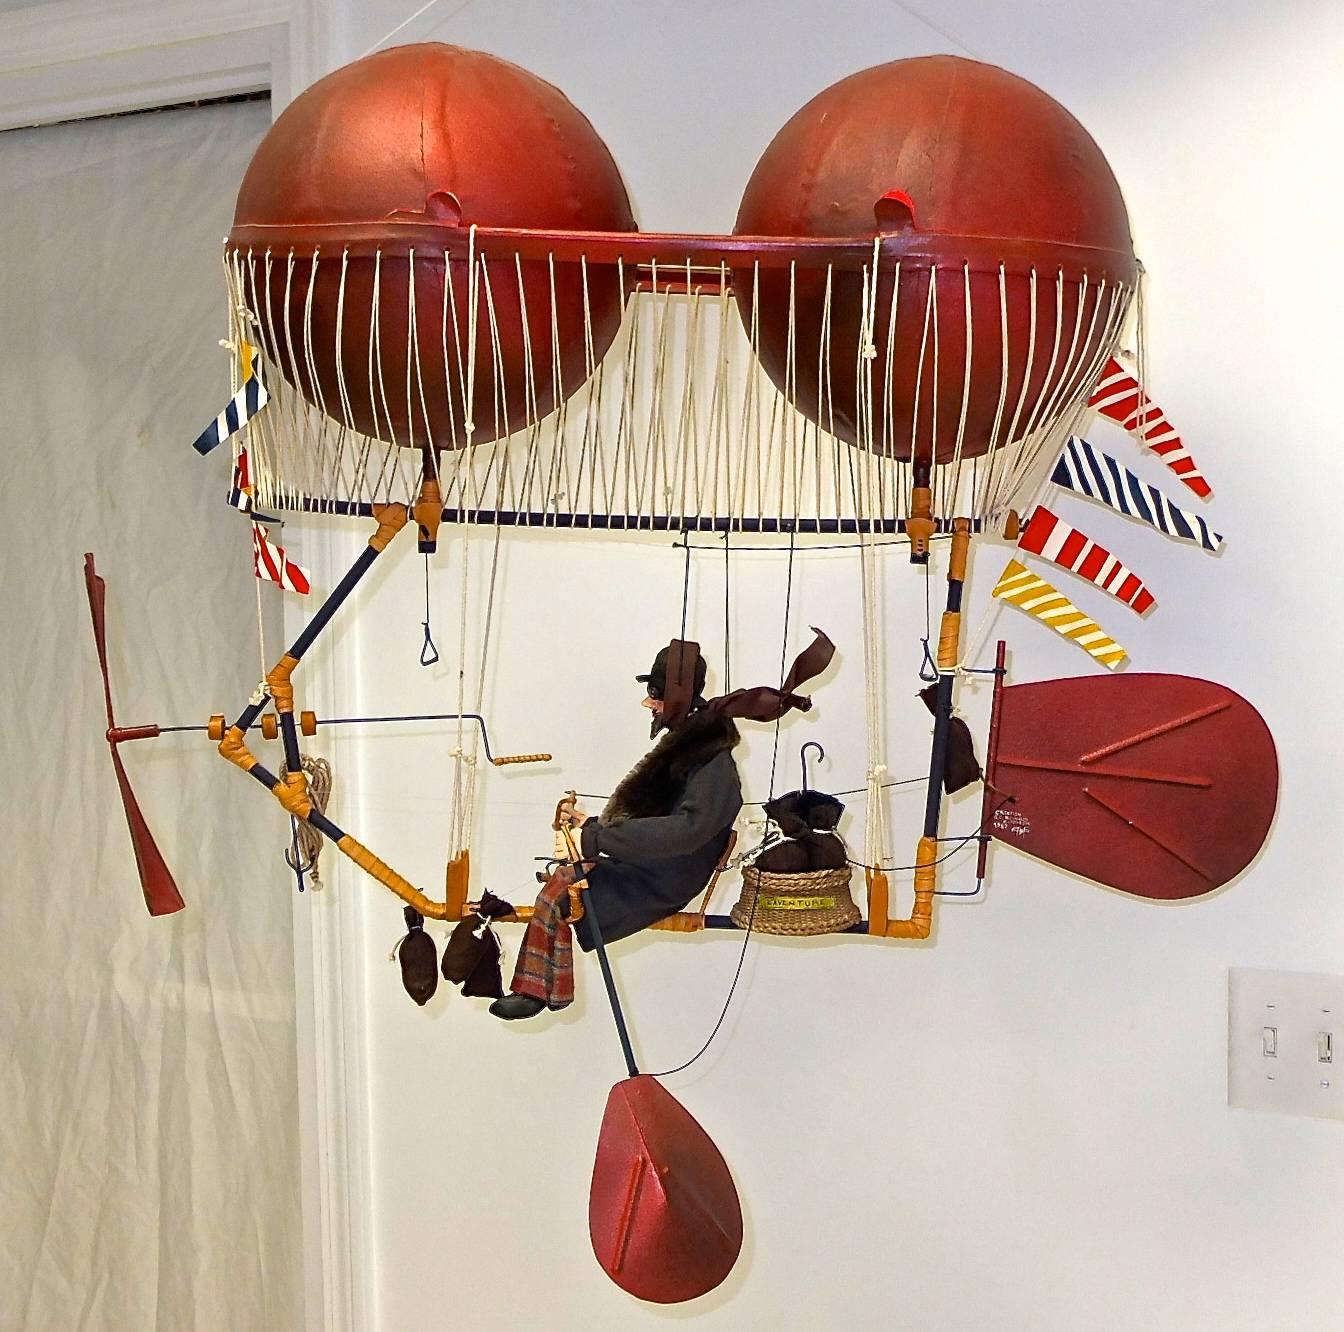 Signed original Kinetic mobile sculpture called “L’Adventure” by Claudia Marchesin & Serge Reynaud, 1989, from their Art of Flying series. 

Marchesin and Reynaud use art, science and imagination to create fantastic flying machines, taking